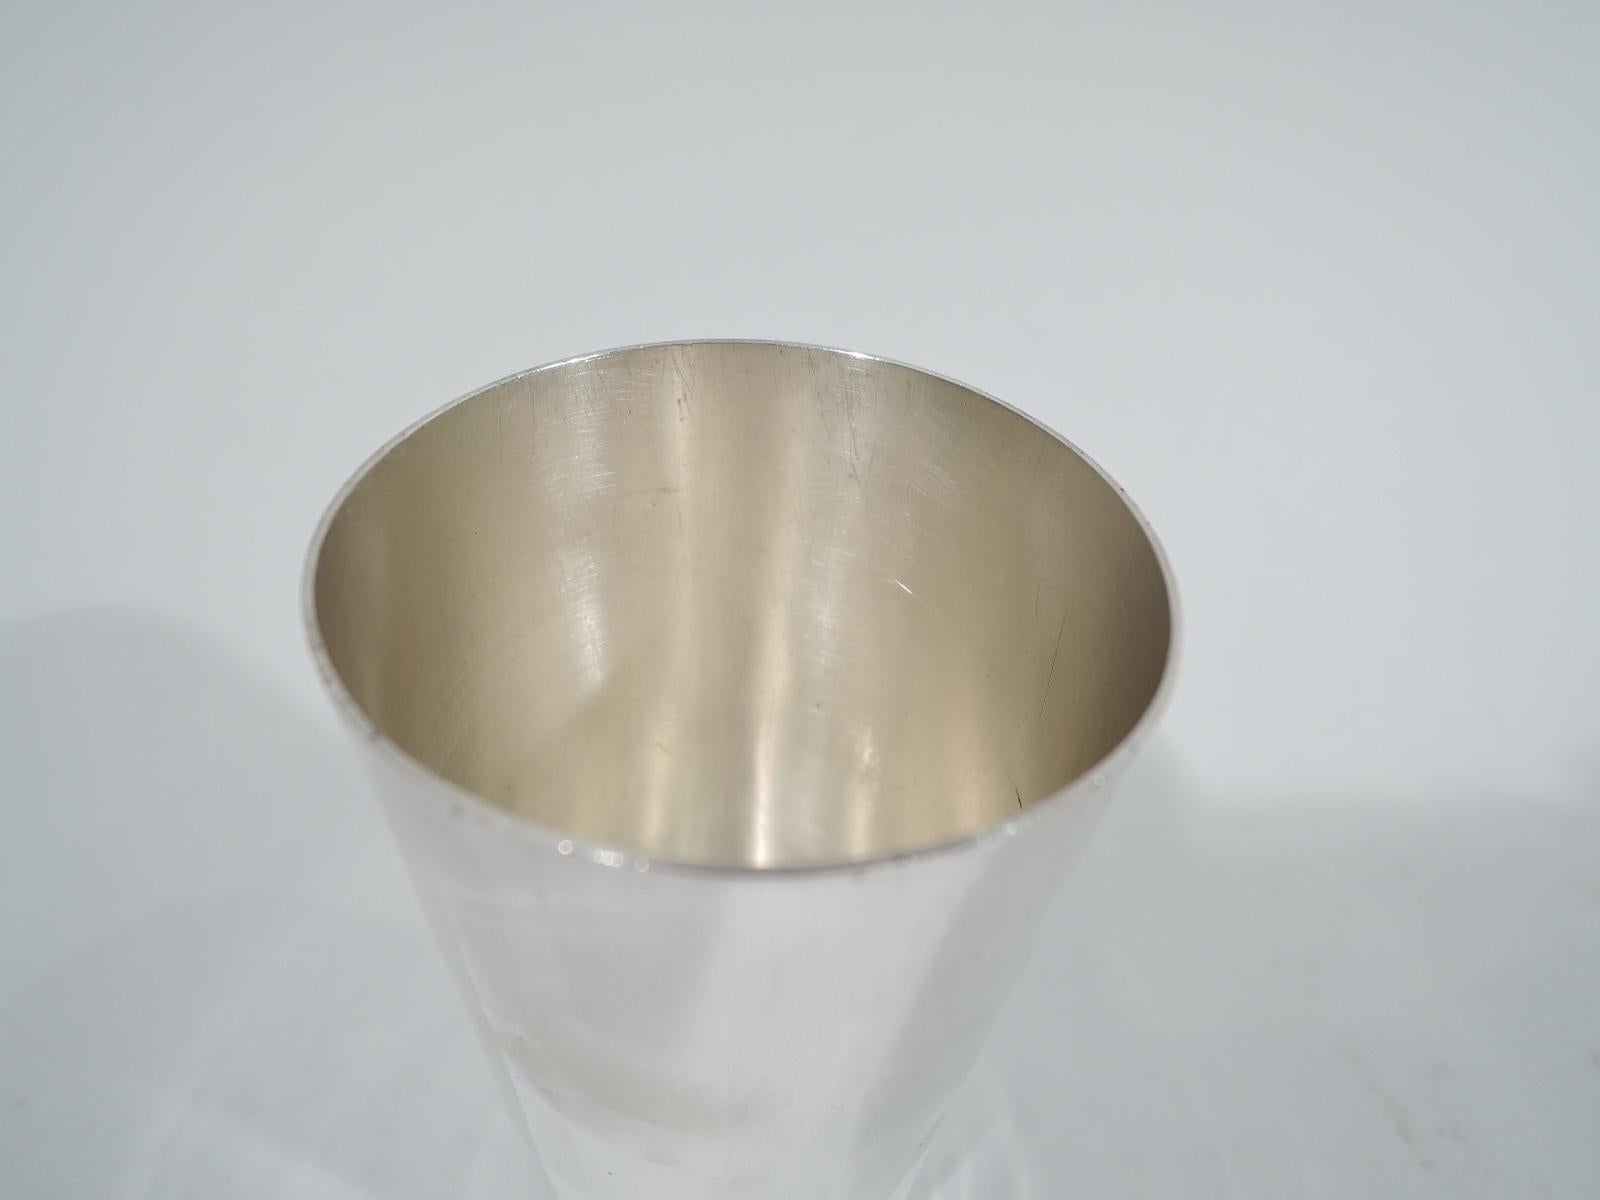 Edwardian modern sterling silver beaker. Made by Tiffany & Co. in New York. Straight and tapering sides and concave bottom. Fully marked including maker’s stamp and pattern no. 12762 and director's letter C (1902-7). Weight: 2.2 troy ounces.